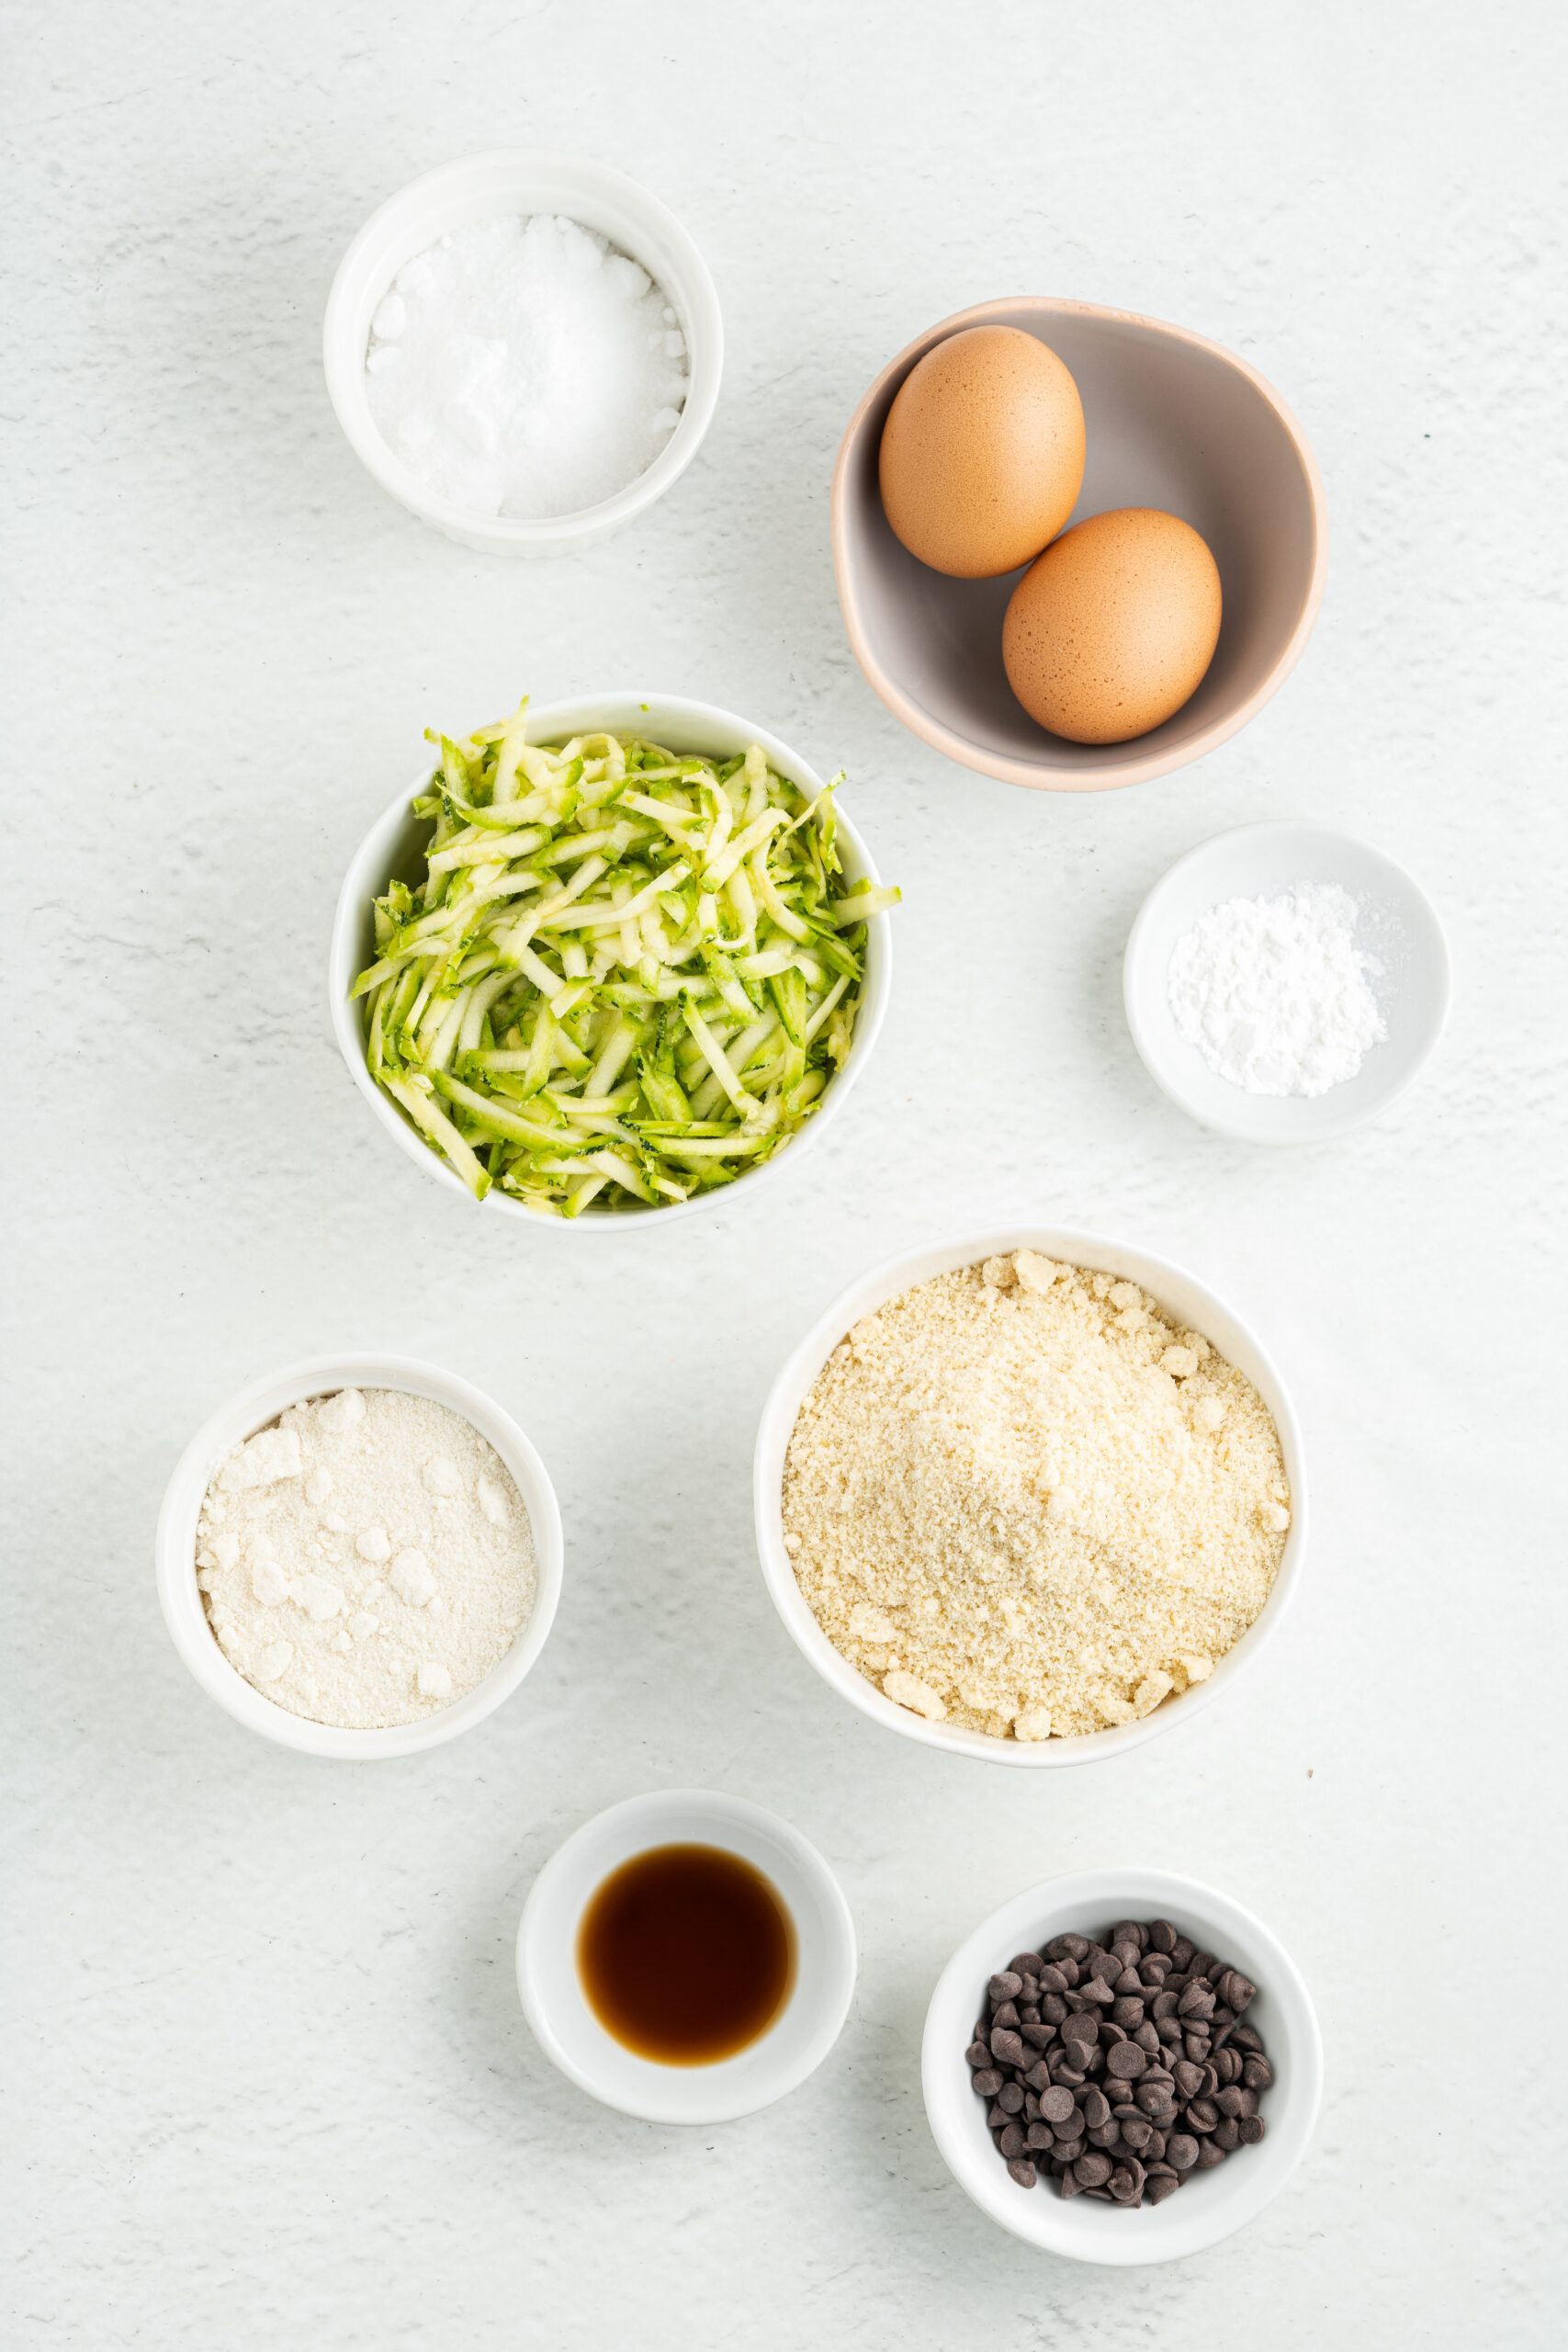 Ingredients for chocolate chip zucchini cookies in small white bowls.